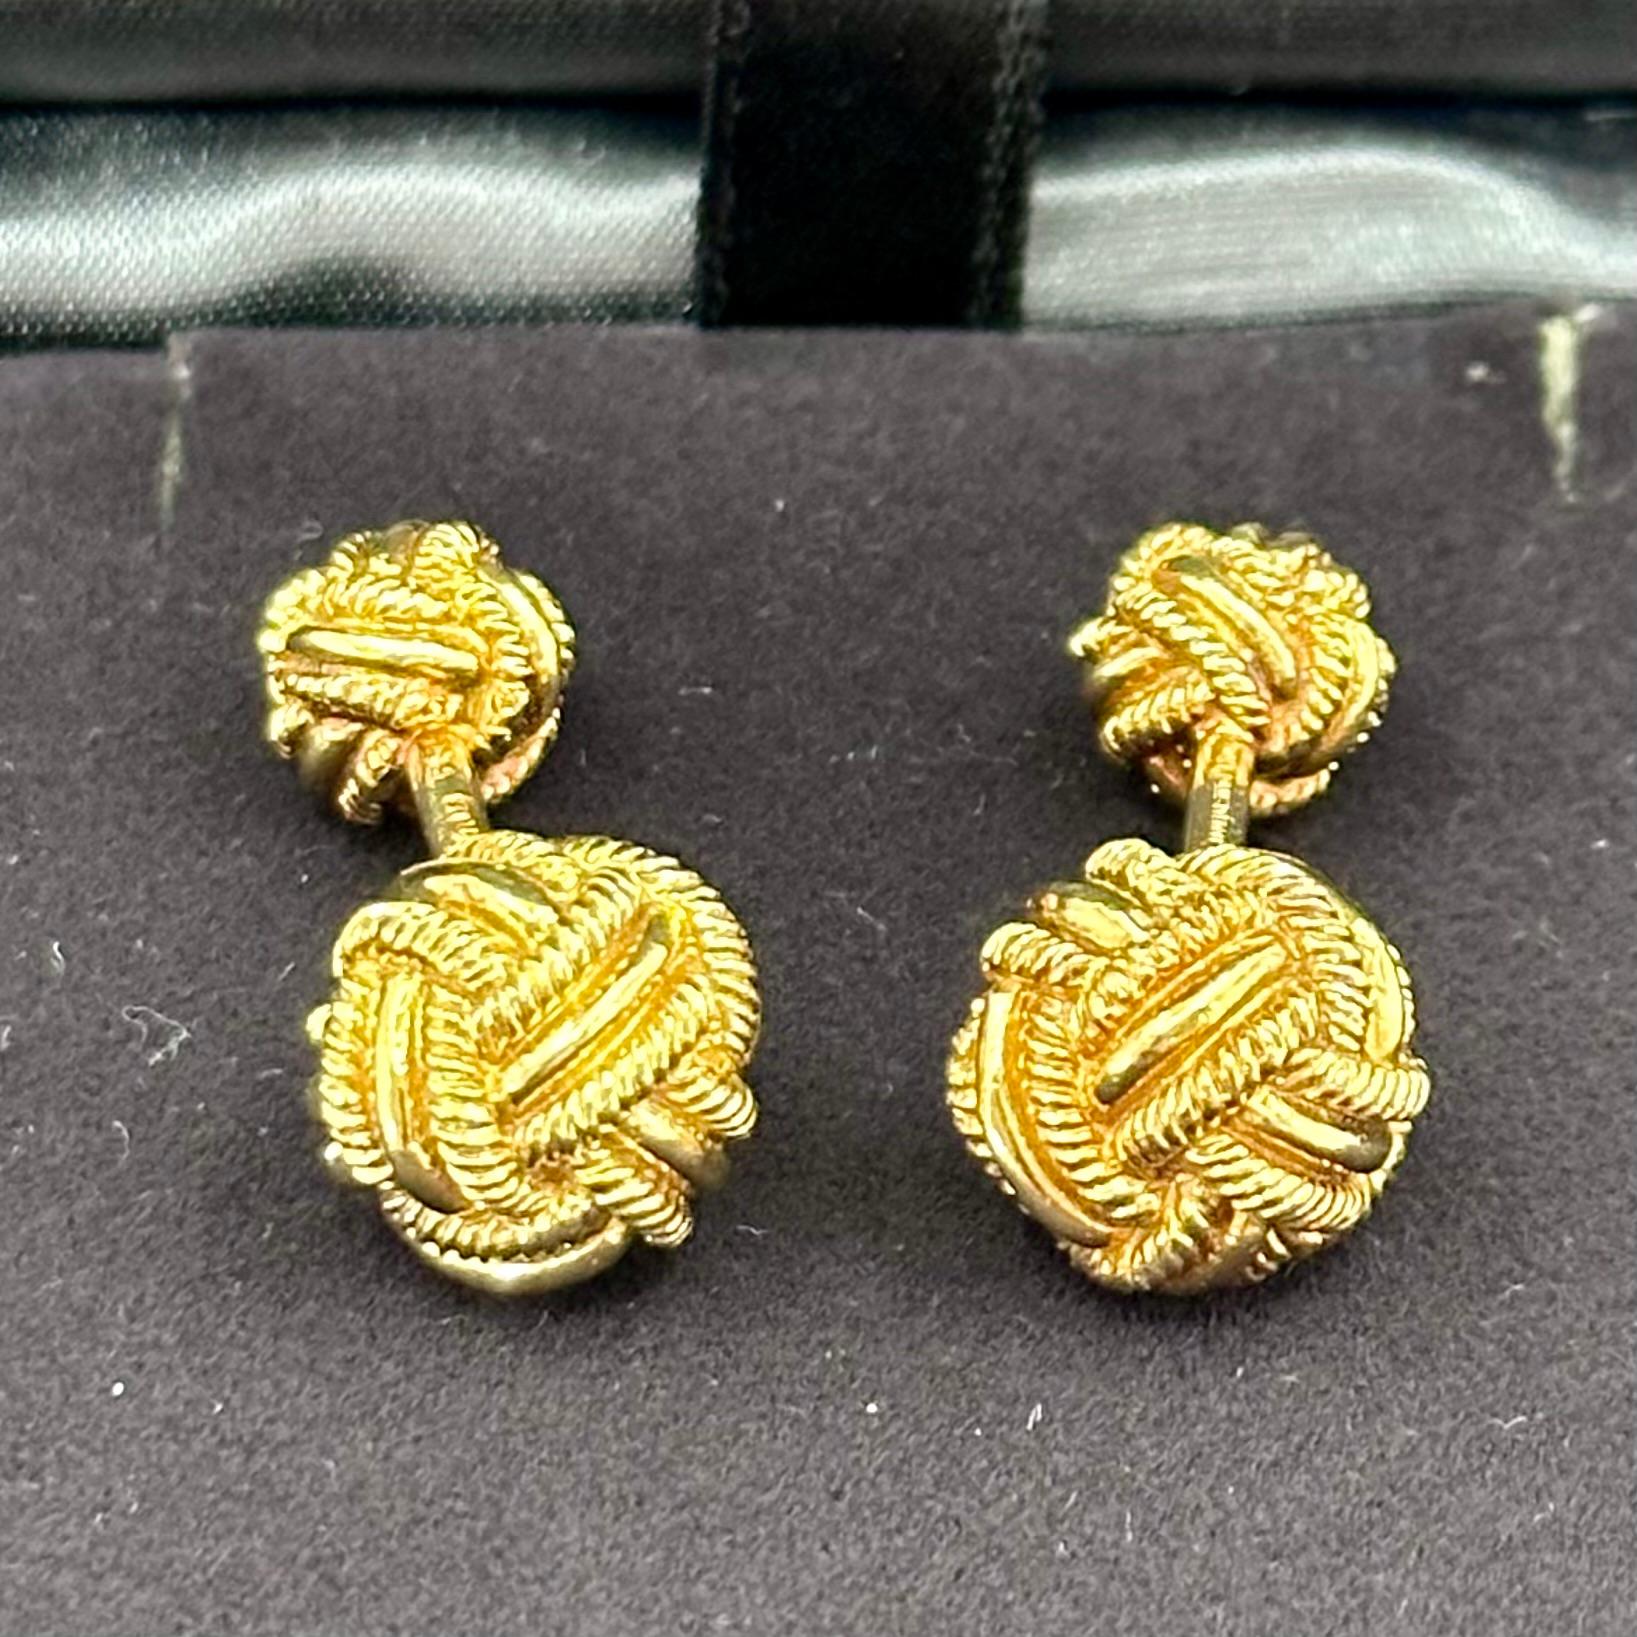 Tiffany & Co Schlumberge 18k Yellow Gold Woven Knot Cufflinks  For Sale 1